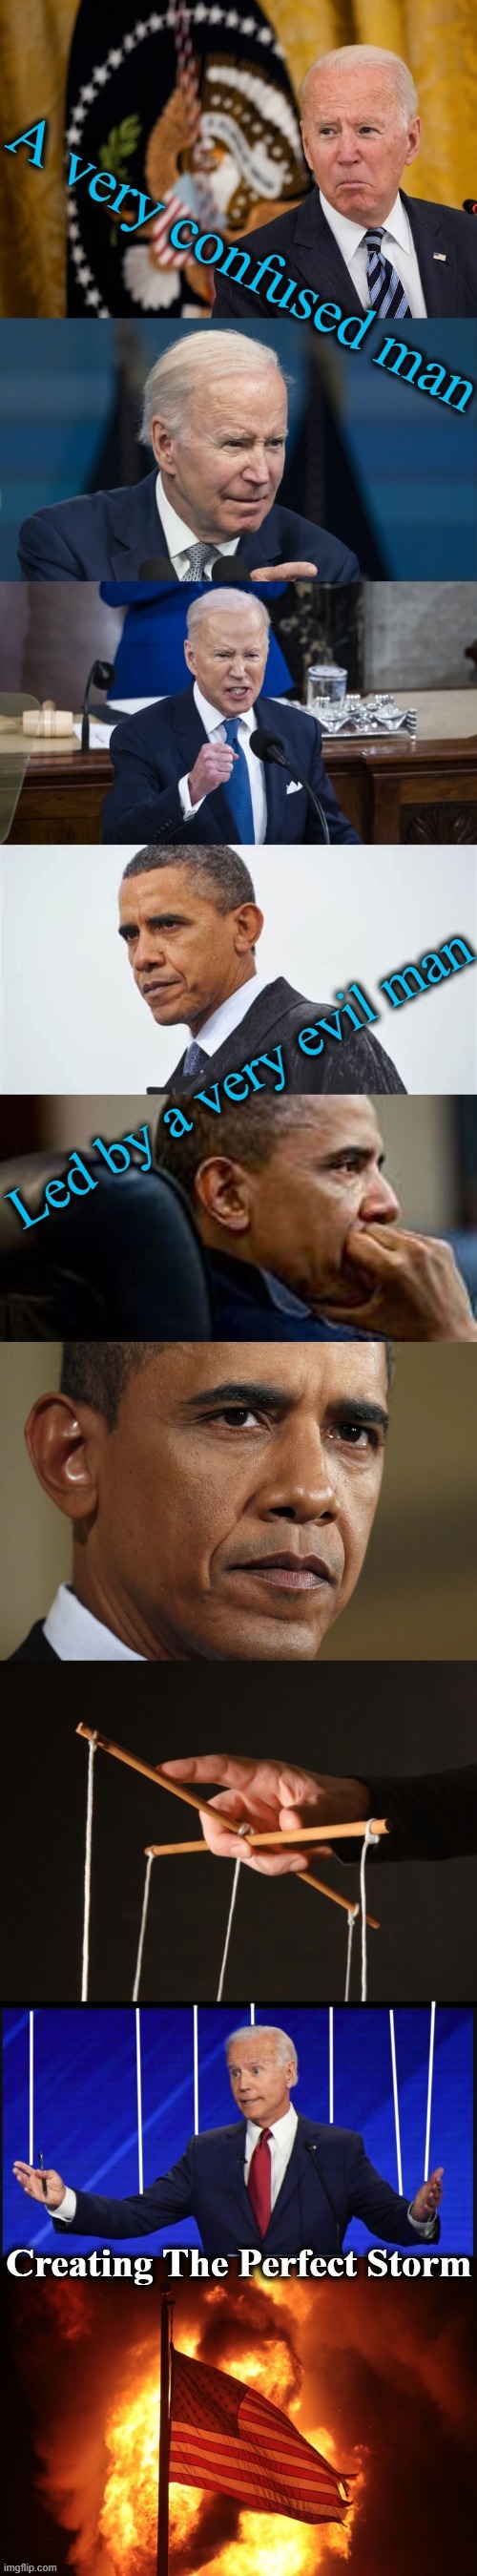 Clear To All Except The Ungovernable Left | image tagged in politics,joe biden,barack obama,confusion,evil,america | made w/ Imgflip meme maker